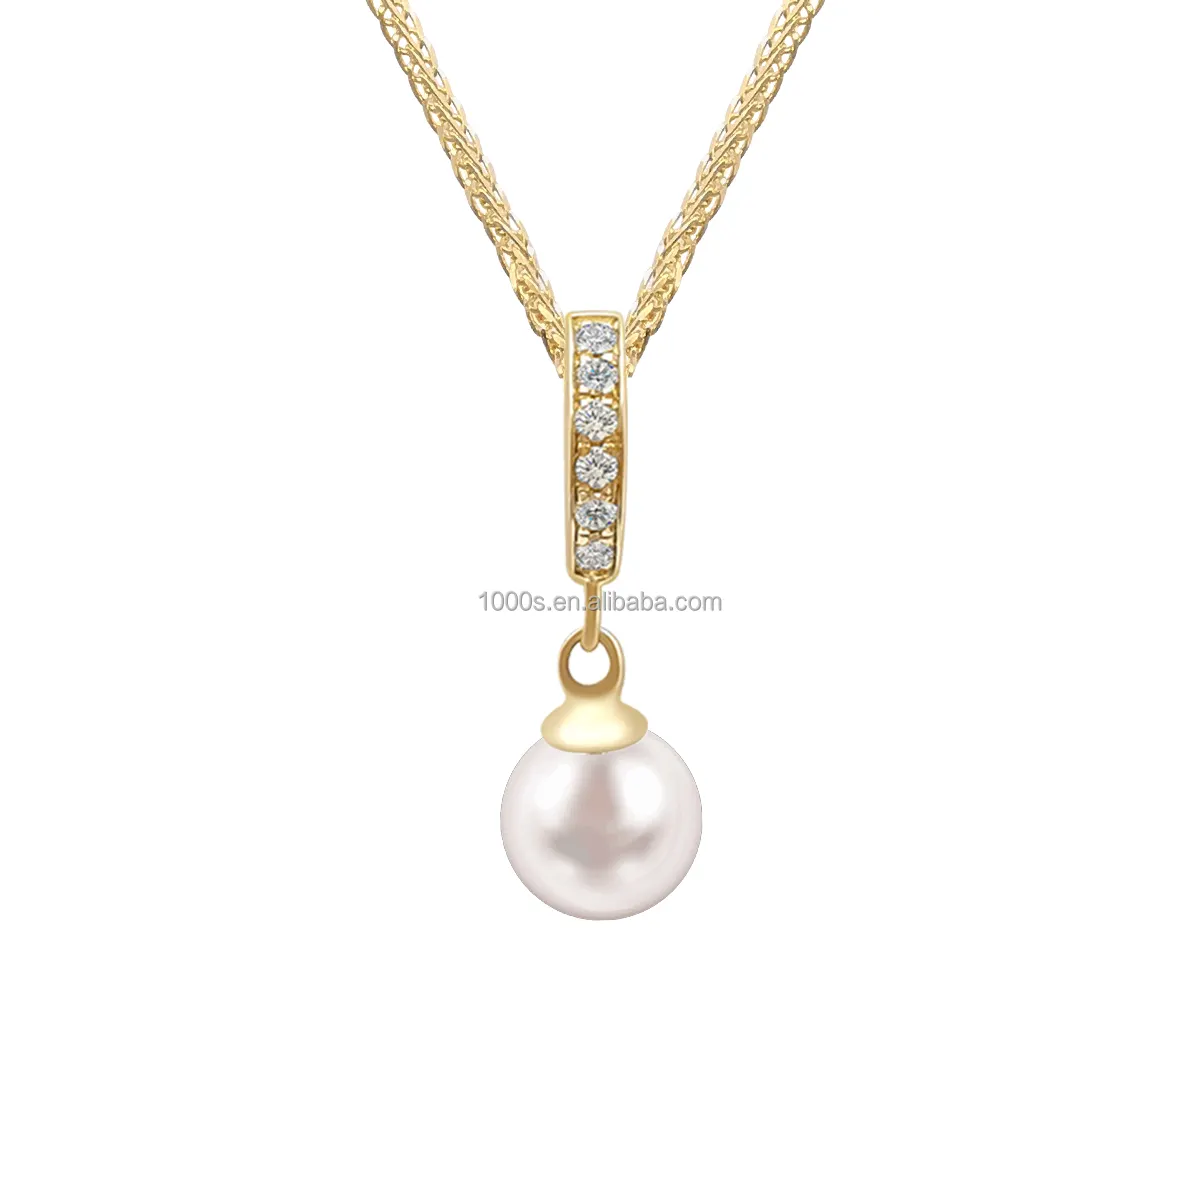 Wholesale Classic 14K Real Gold with 8mm Freshwater Pearl Natural Diamond Charm Gold Necklace for Women Gift Customized